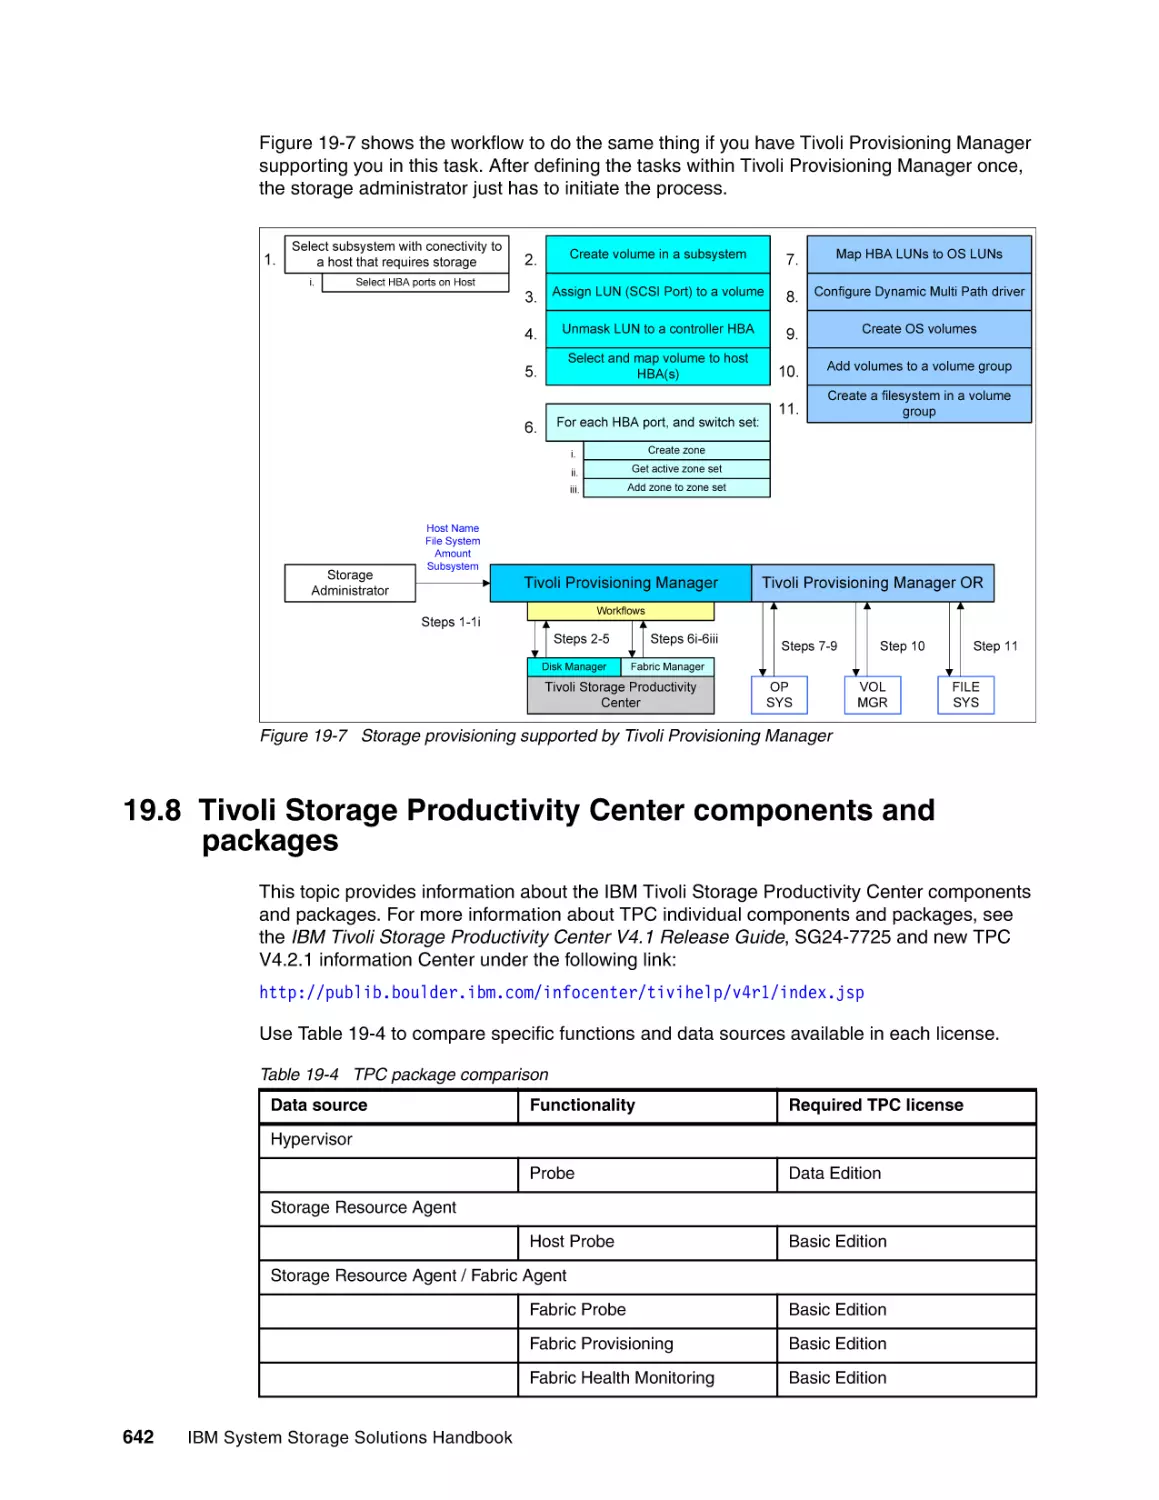 19.8 Tivoli Storage Productivity Center components and packages